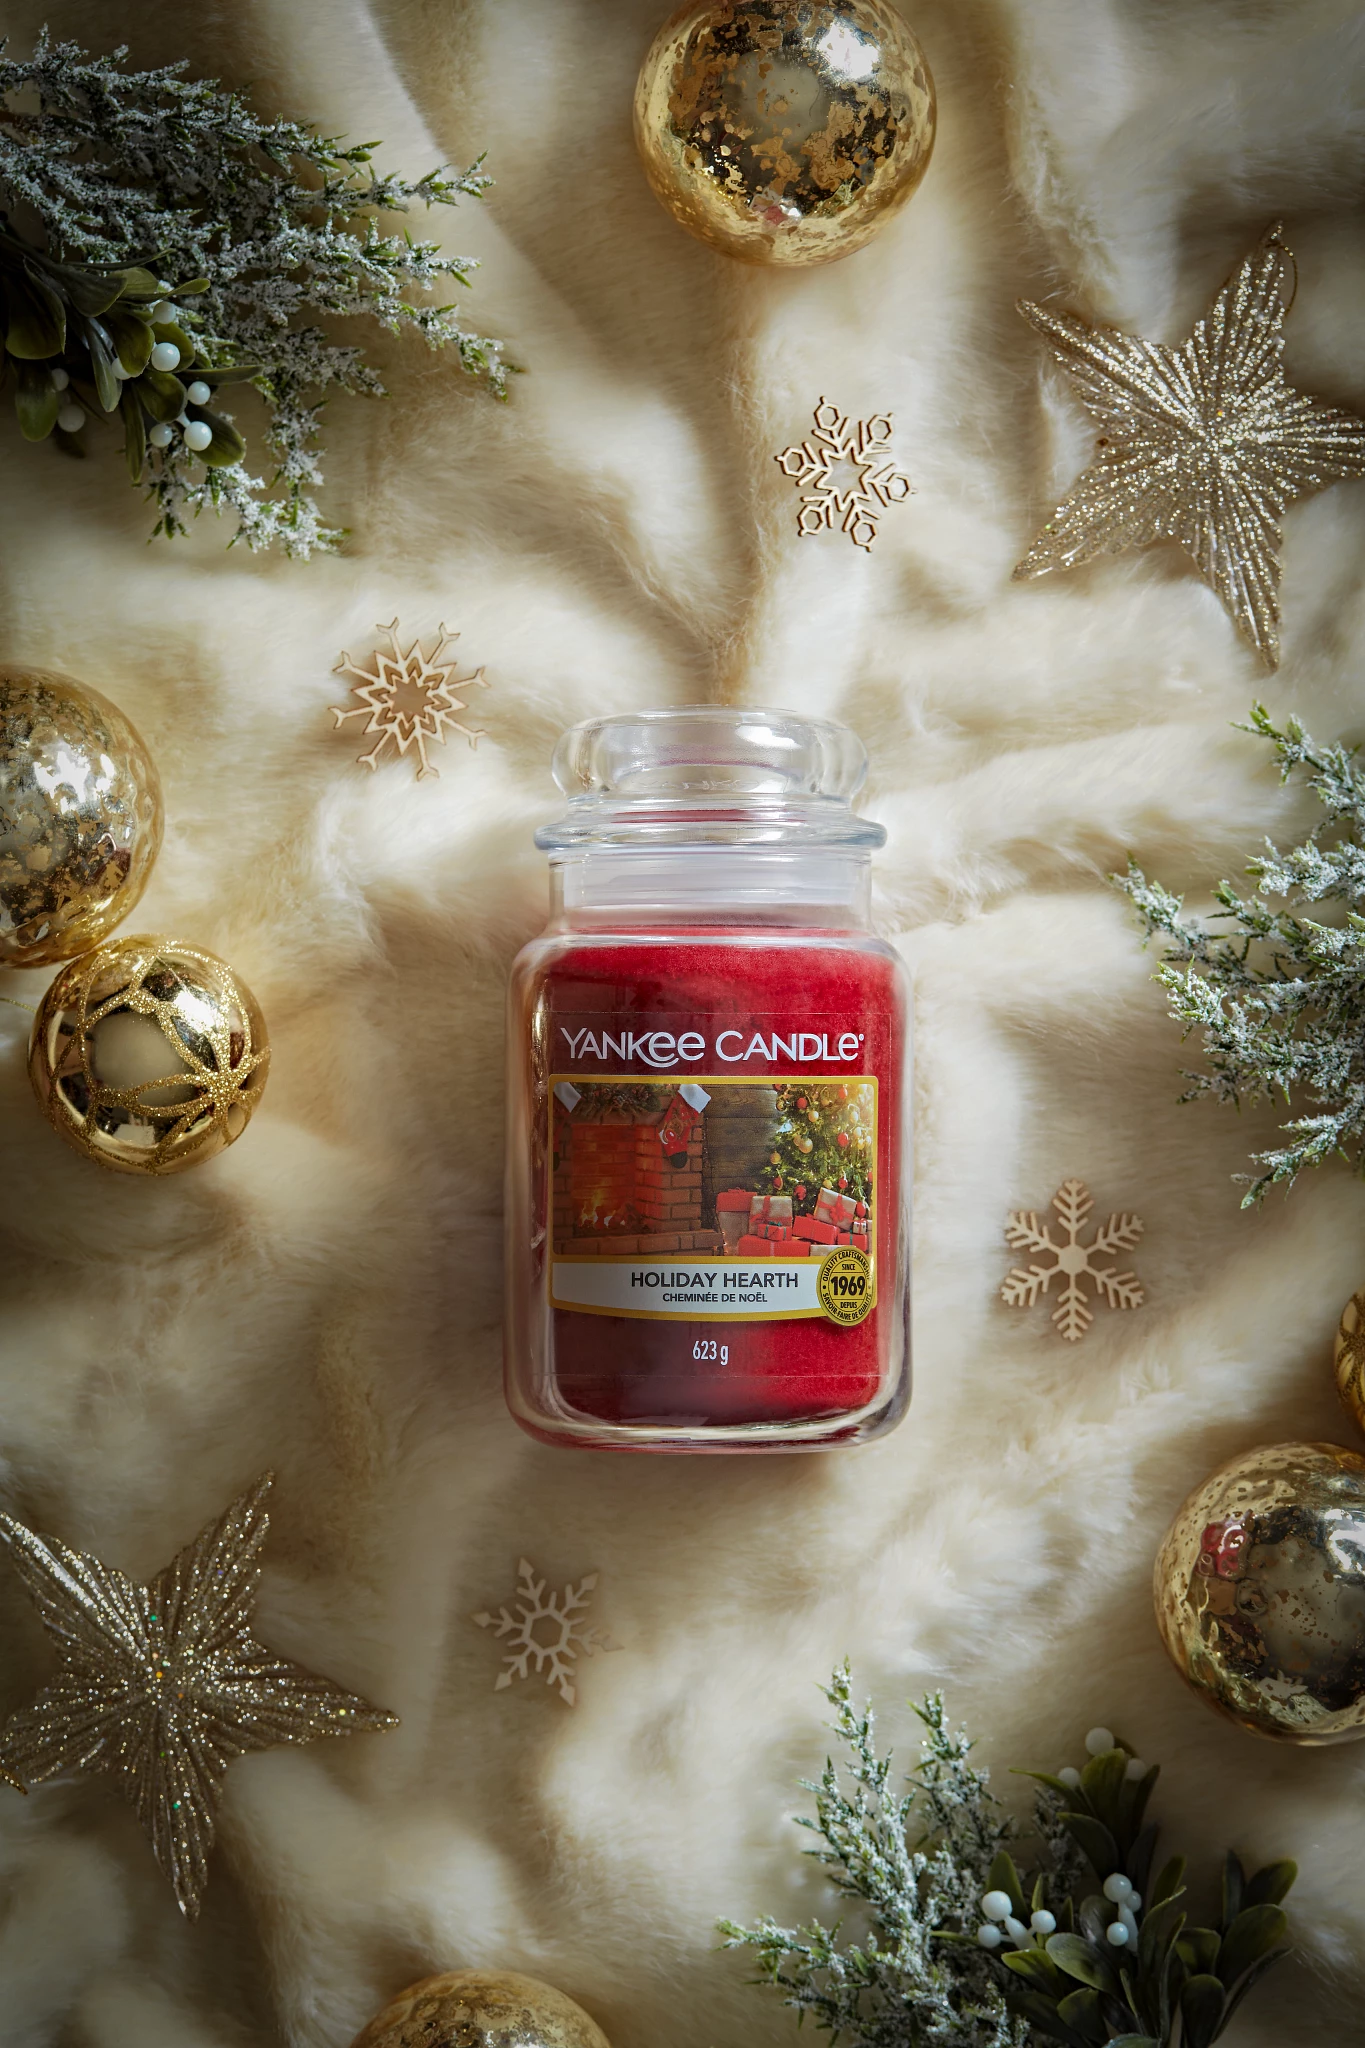 HOLIDAY HEARTH -Yankee Candle- Giara Media – Candle With Care